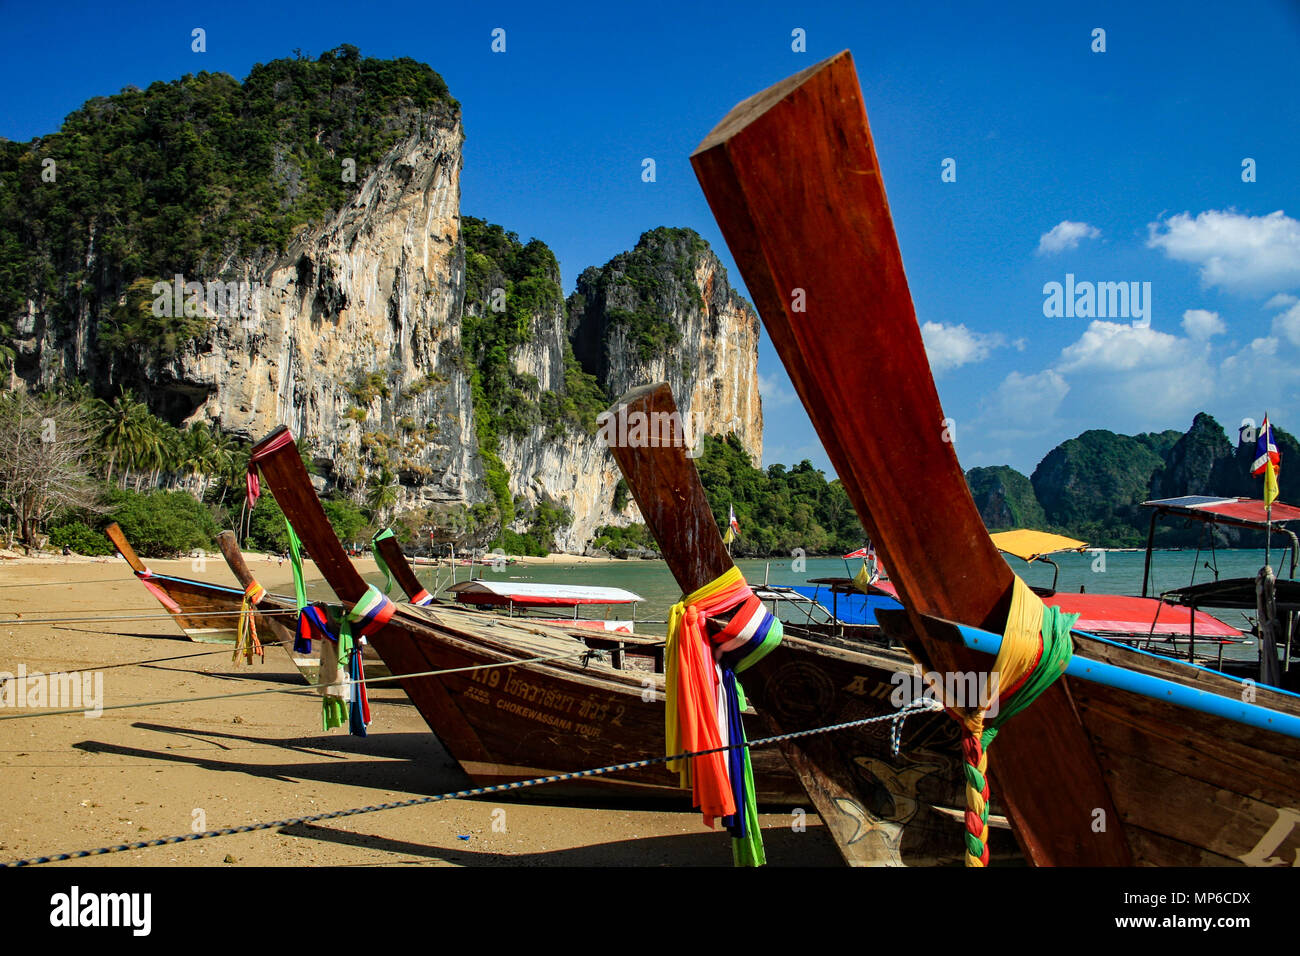 Long tail boats with karst cliffs and blue sky in background on West Railay, Tonsai, Beach, Thailand Stock Photo